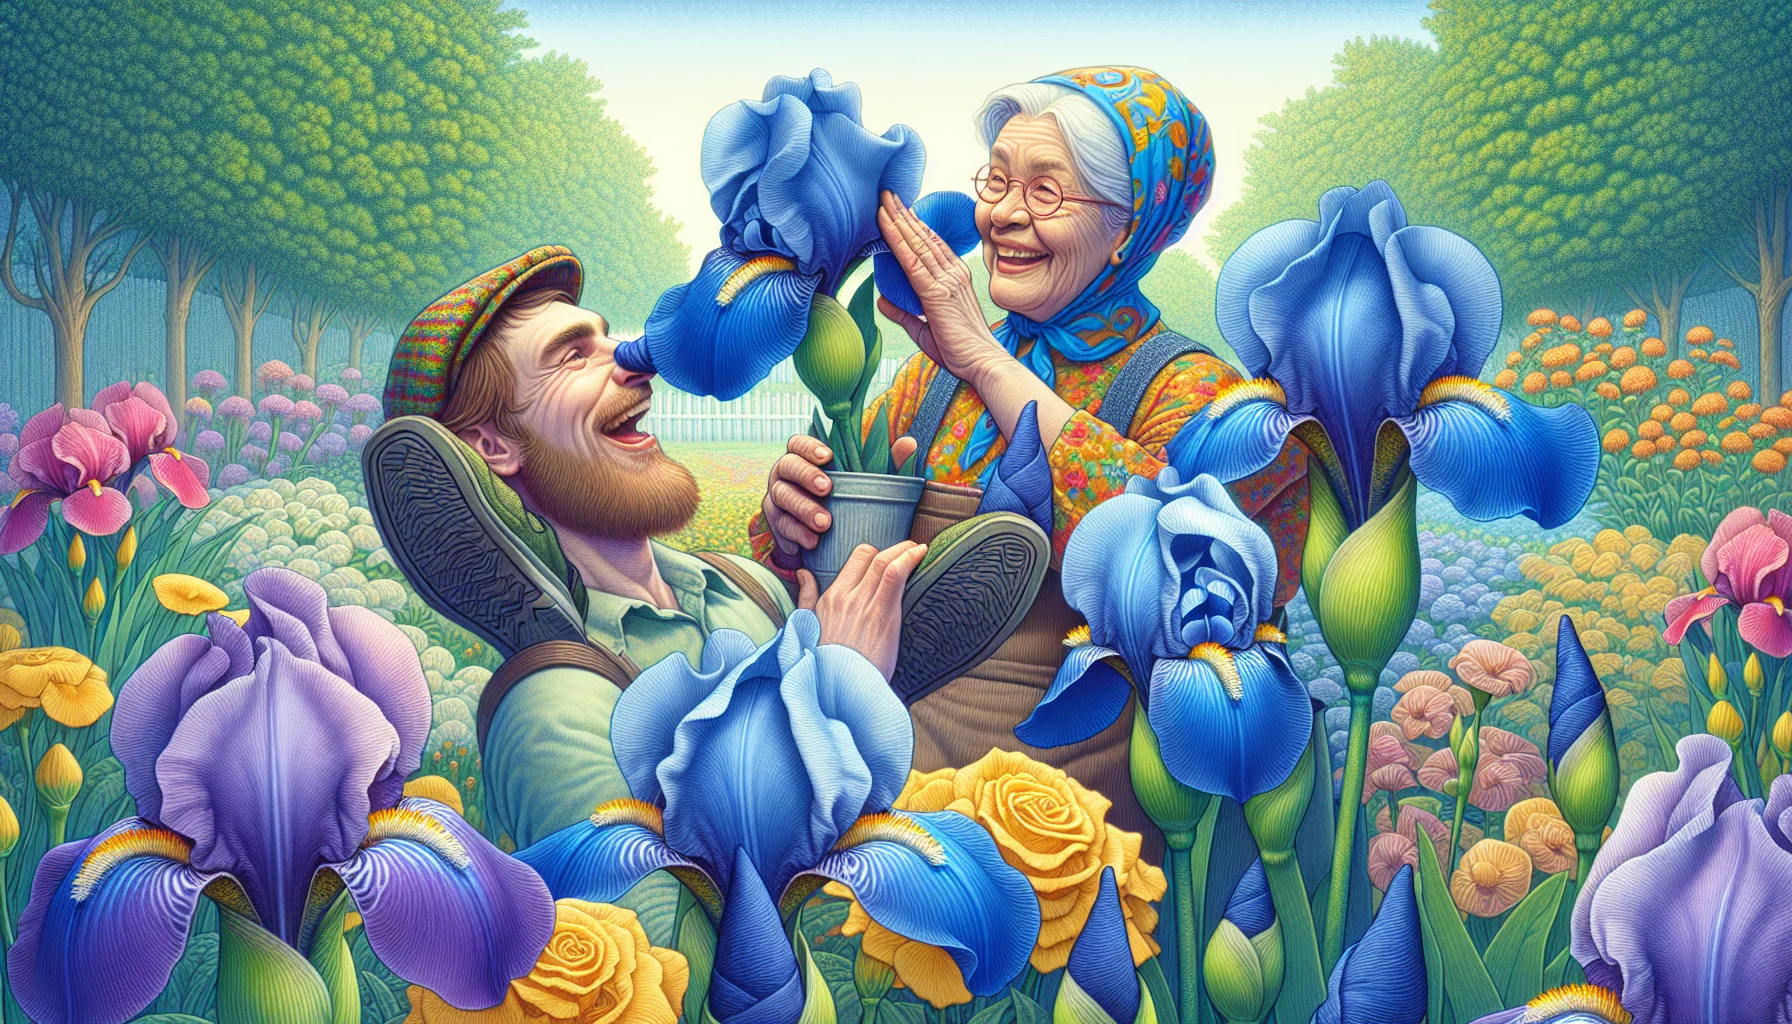 Create a detailed and humorous illustration that symbolizes the meaning of the Iris flower in a gardening context. The image should depict an amusing scene where a Caucasian man and a South Asian woman, both wearing colorful gardening clothes, are surrounded by vibrant Blue Iris flowers in a lush garden. The Iris flowers, in an exaggerated size, should be interacting playfully with the gardeners - perhaps one could be tickling the man's nose, causing him to laugh, and another flower could be 'whispering' into the woman's ear, making her chuckle. The overall atmosphere of the illustration should invite viewers to appreciate the joy and serenity that gardening can provide.